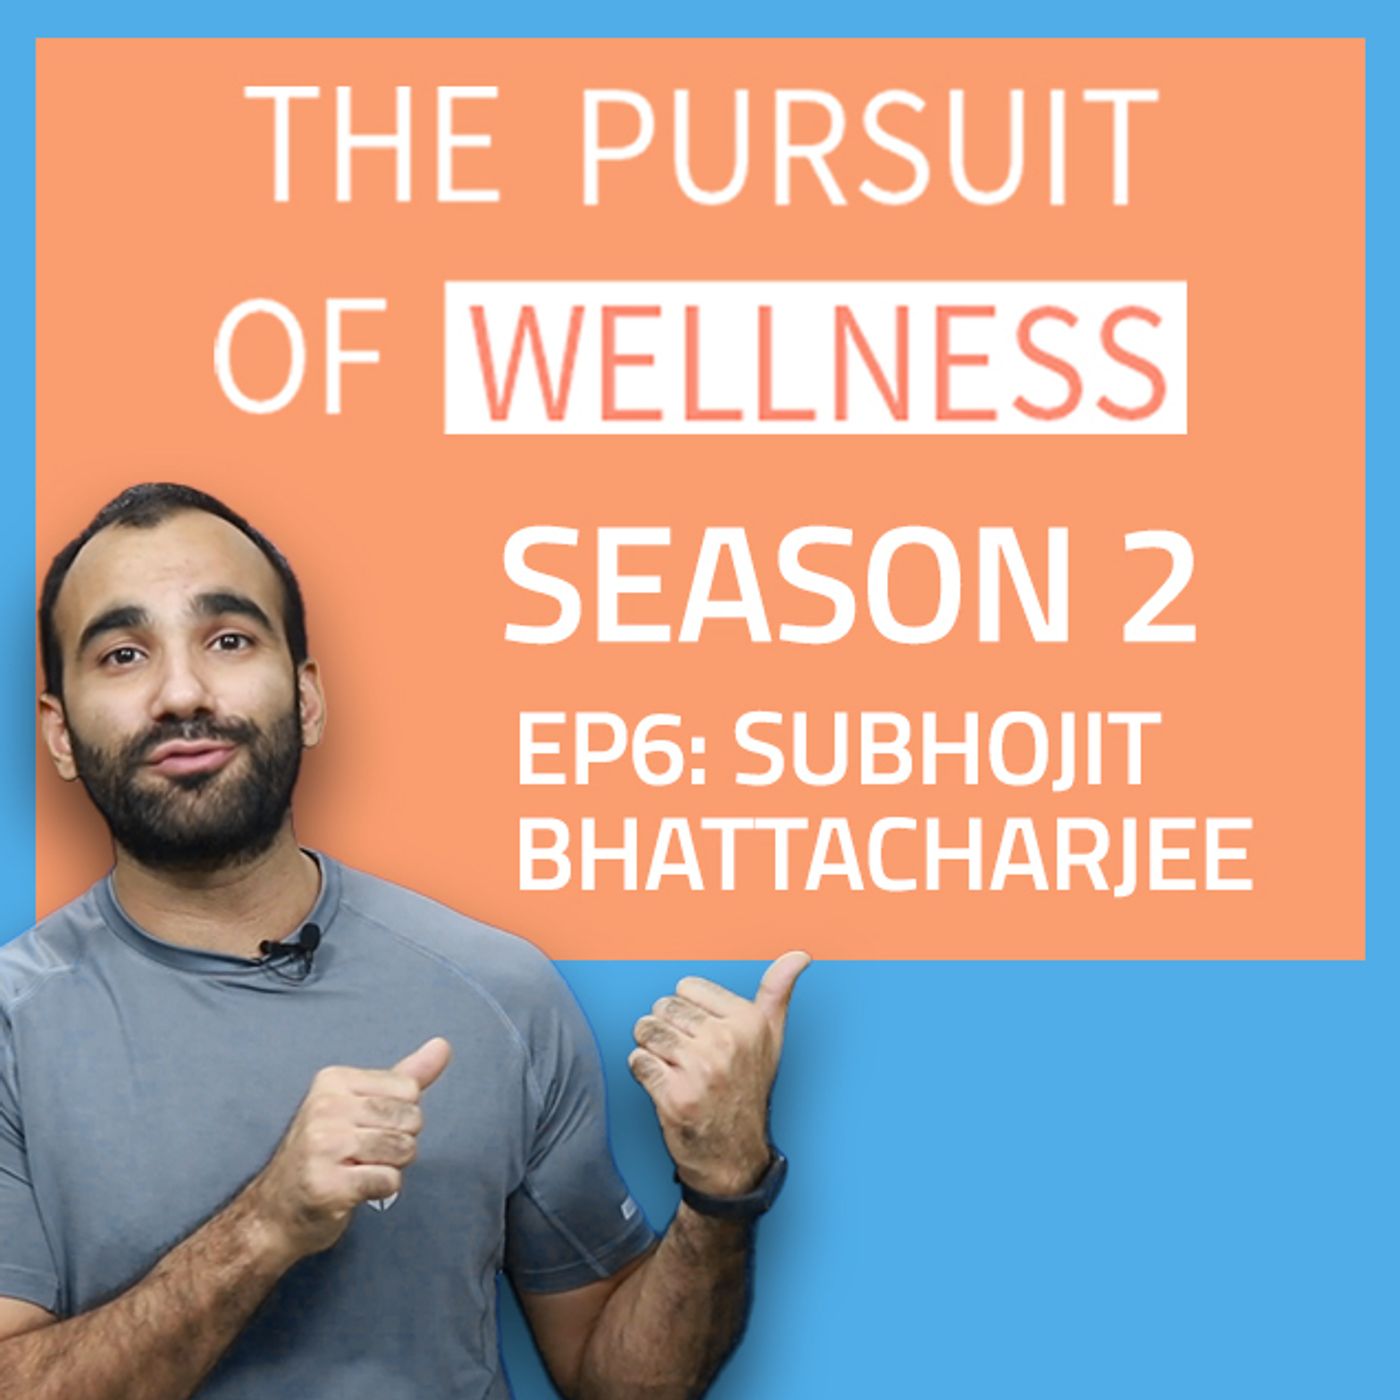 S2 Ep6: "Becoming a Fitness Trainer" with Subhojit Bhattacharjee